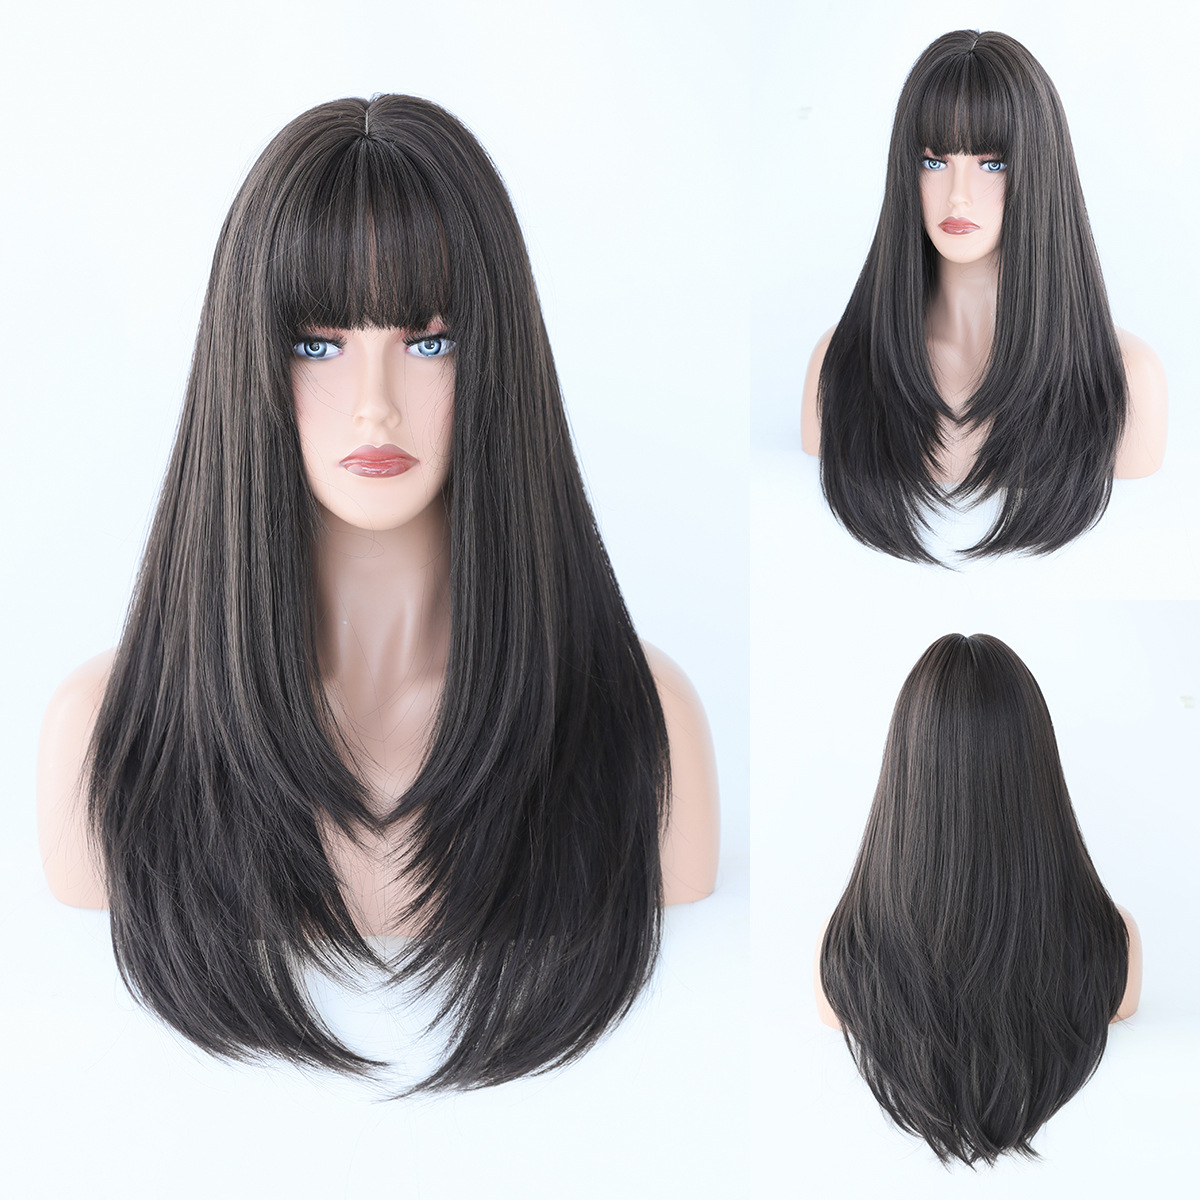 A synthetic wig with multicolor straight hair and fashionable air bangs, perfect for any occasion